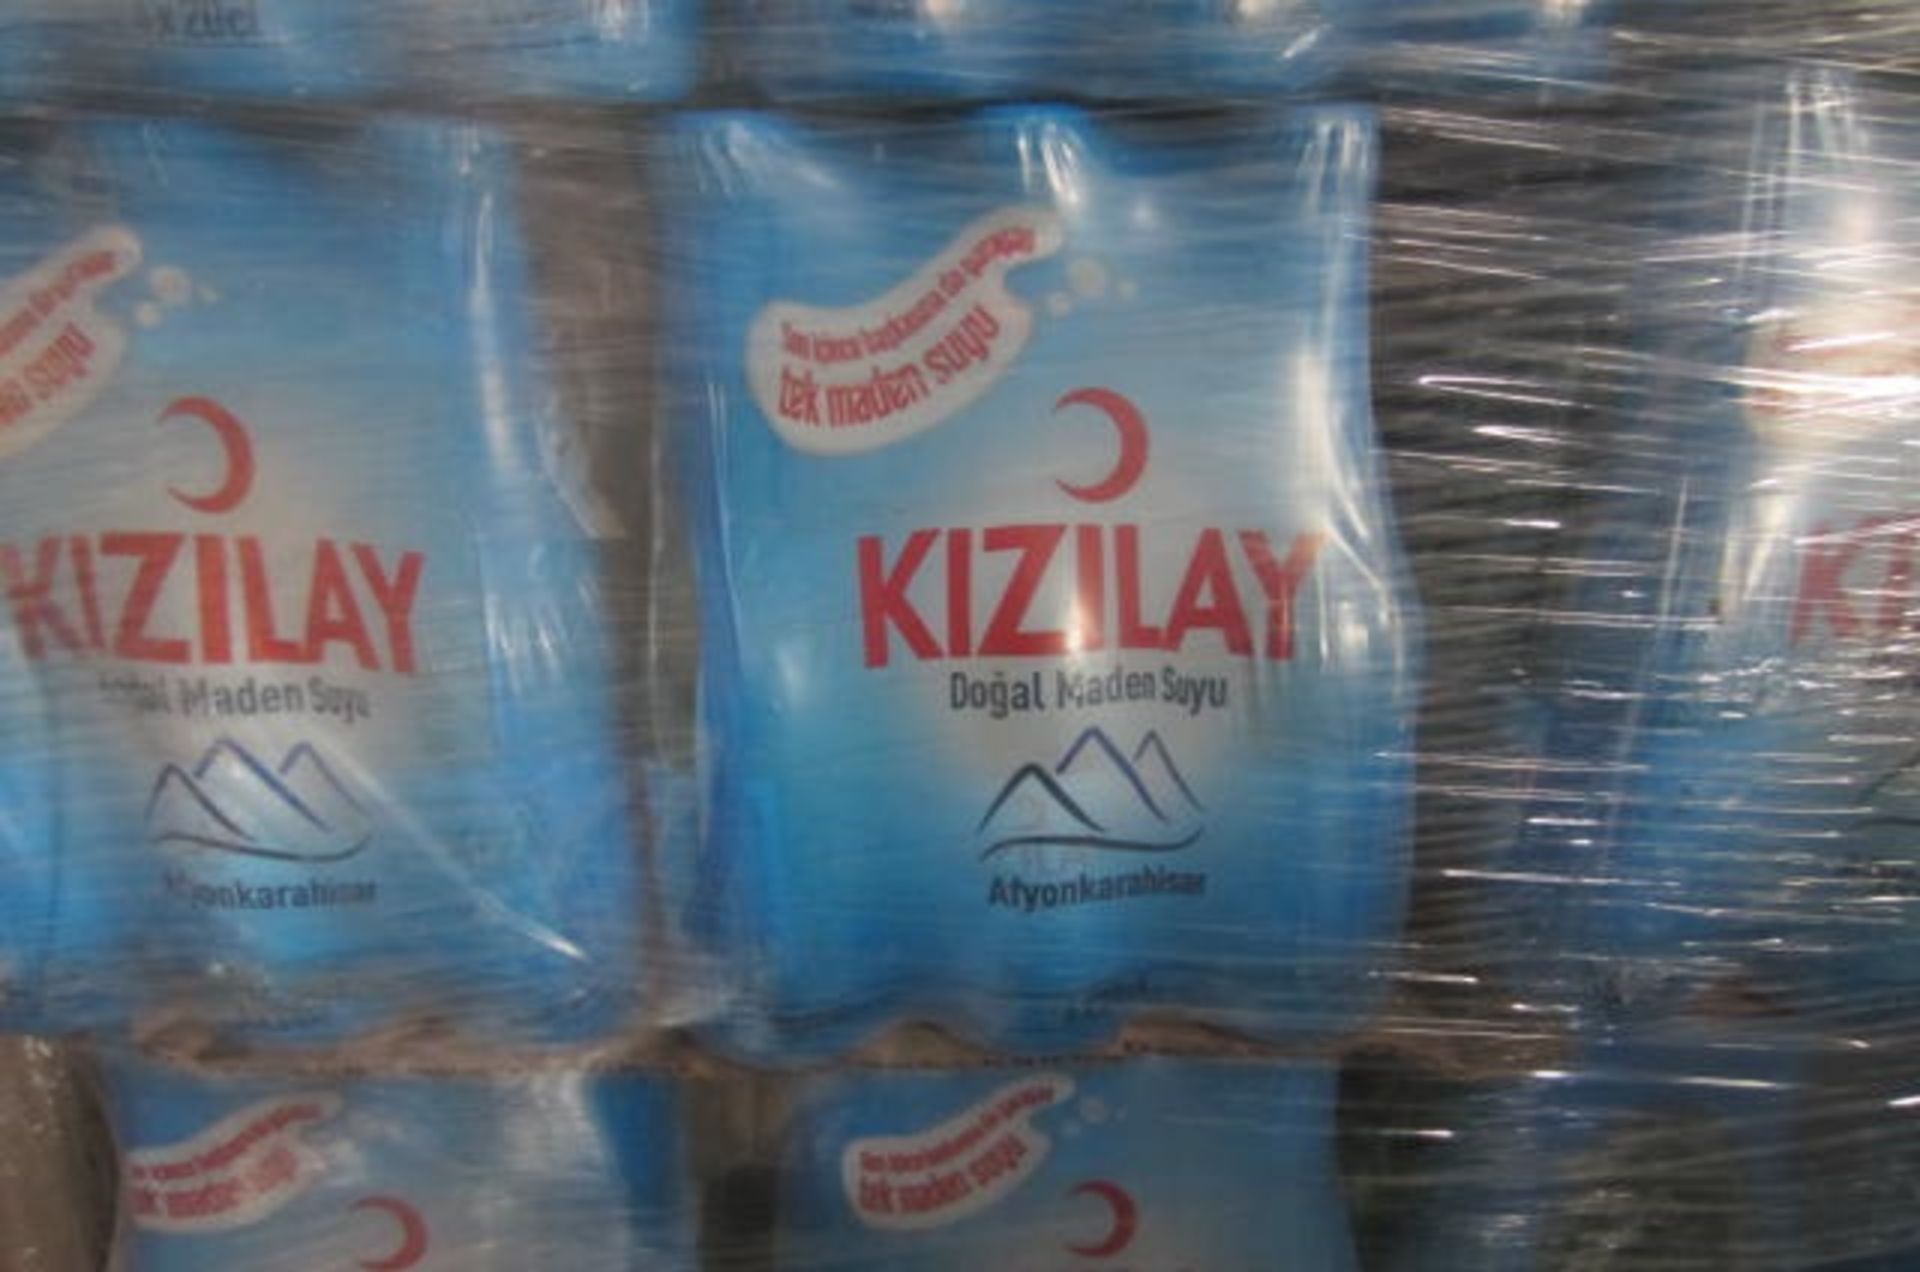 2 x Pallets Containing 128 Cases of 24 x 20cl Bottles of Kizilay Natural Mineral Water per pallet. - Image 2 of 3